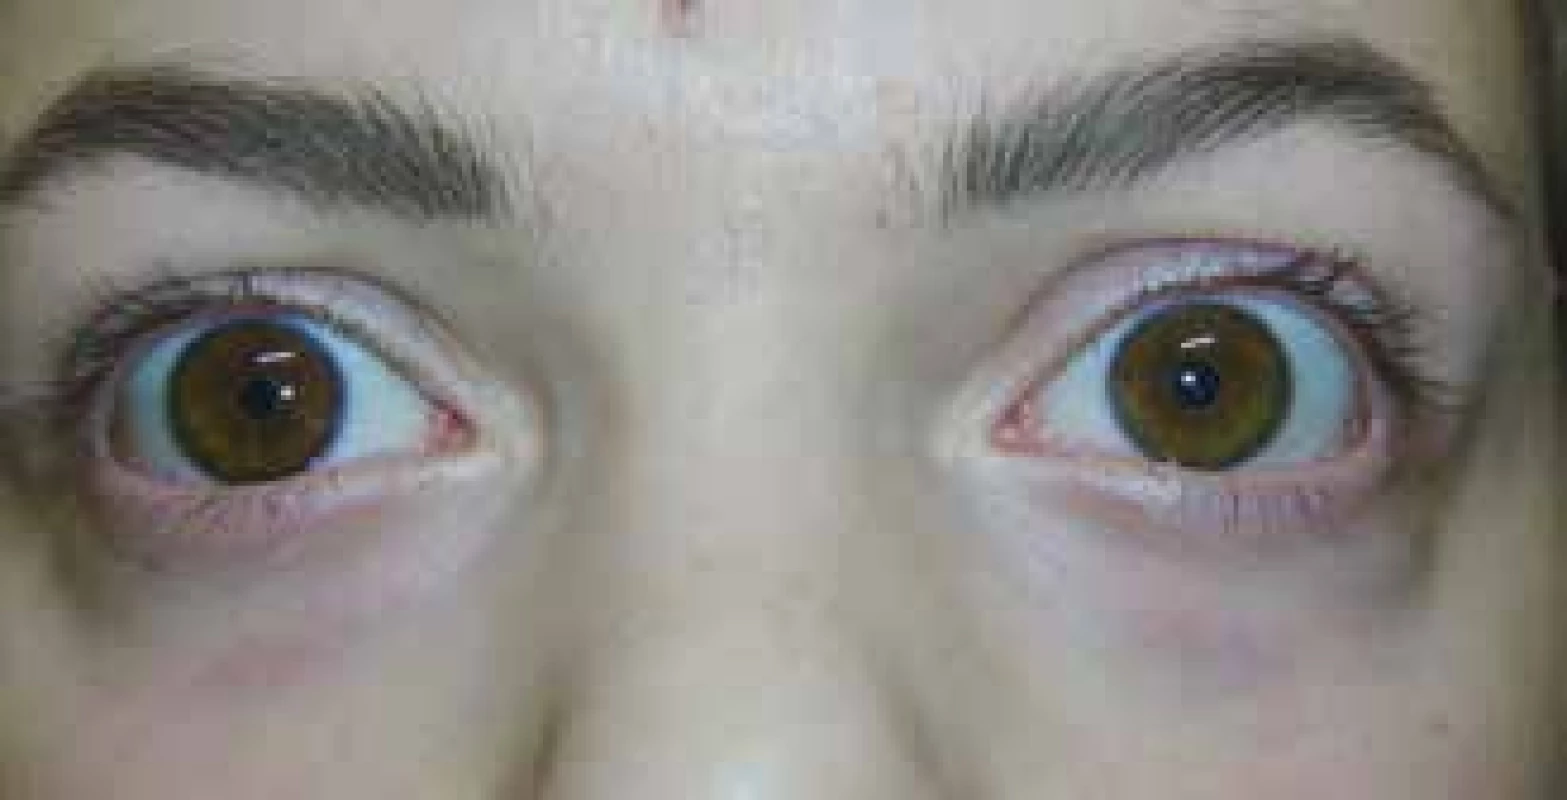 Positive result of pharmacological test with application
of 1.0% Pilocarpine in left eye